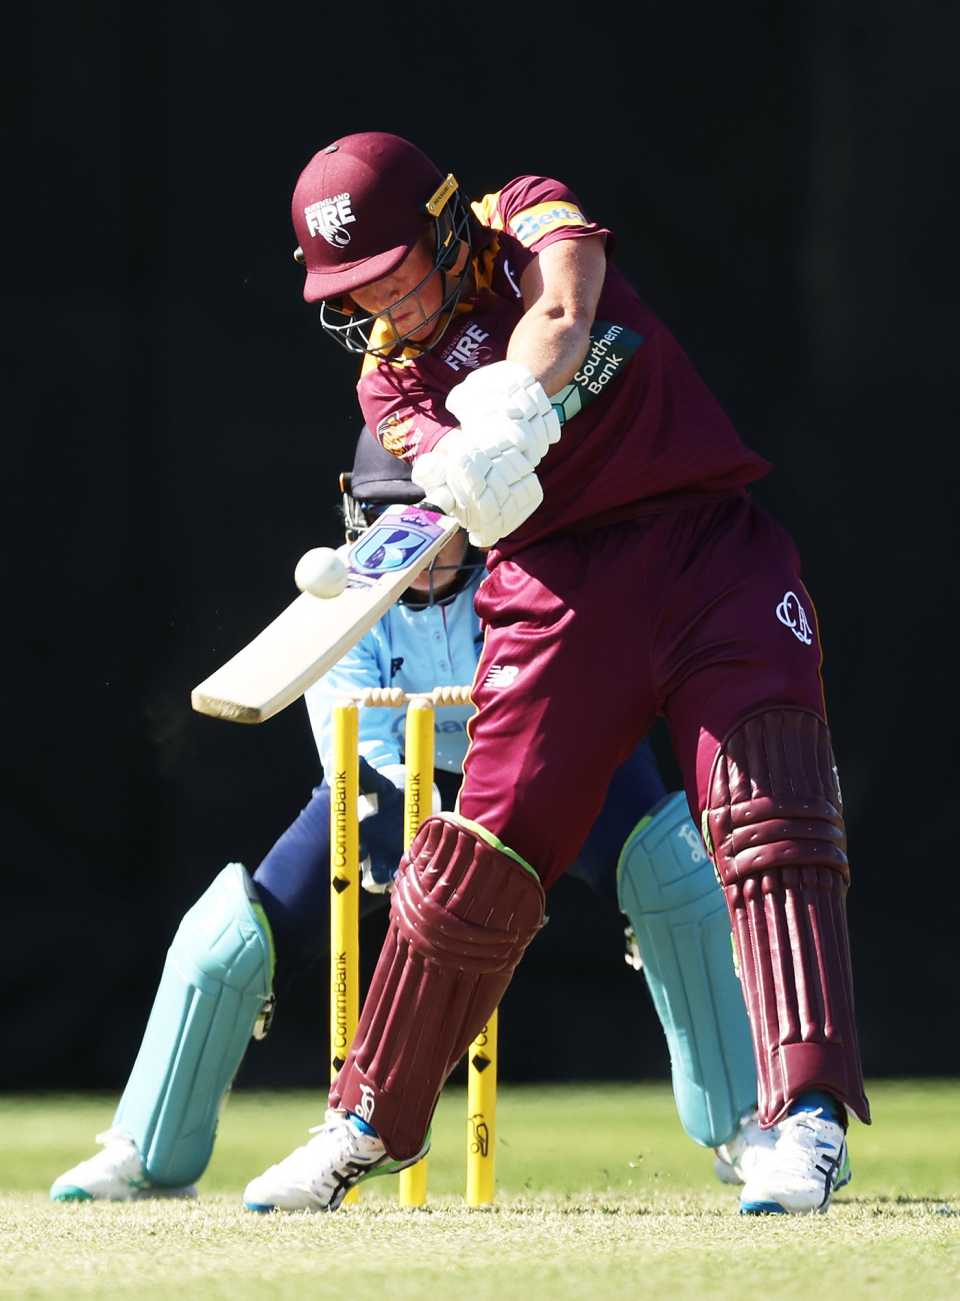 Grace Harris launches the ball, Queensland vs New South Wales, WNCL, North Sydney Oval, September 25, 2022